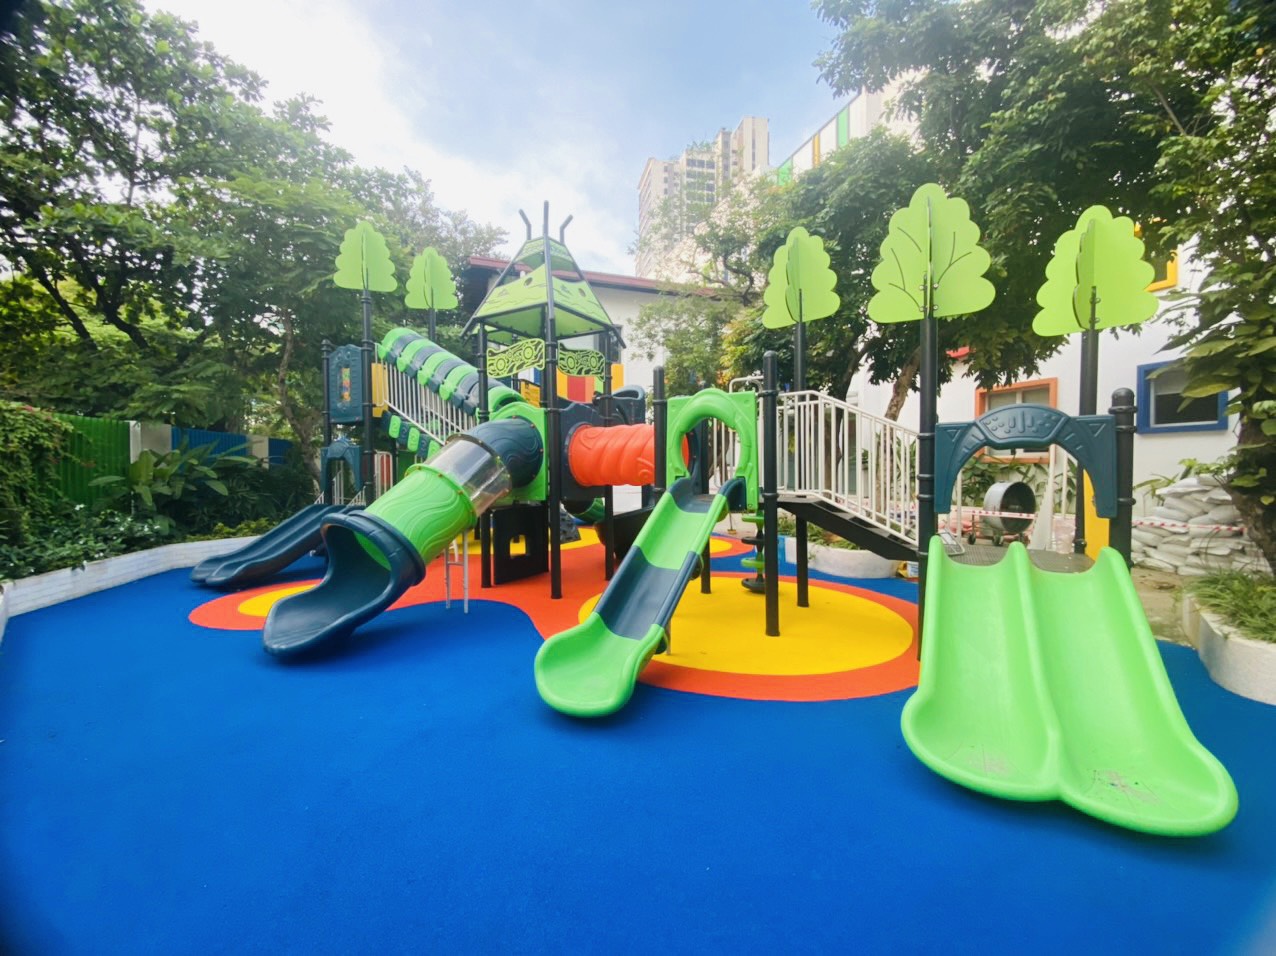 Top trends for outdoor playgrounds in 2022